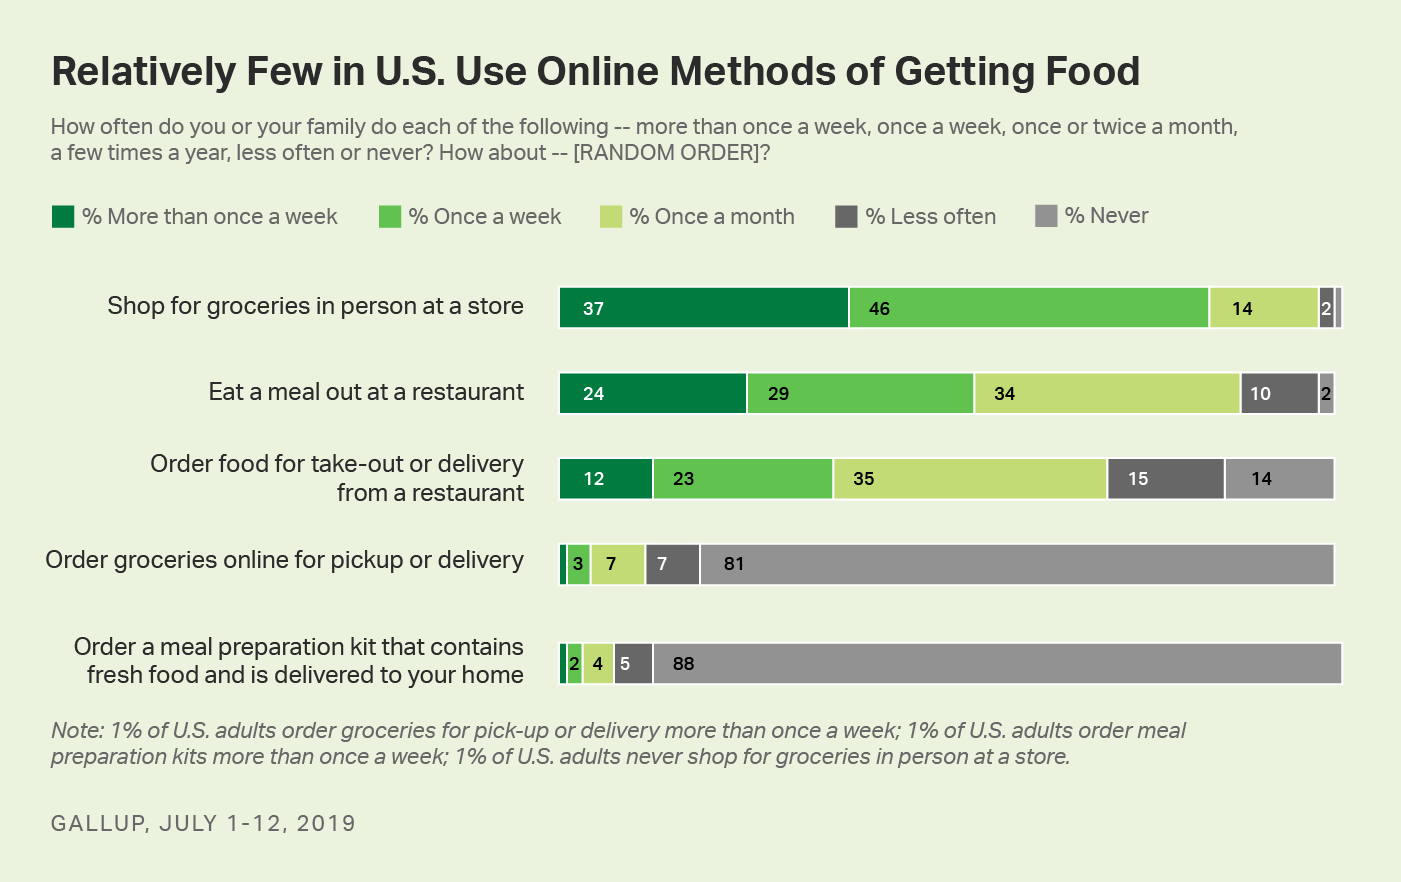 11% of U.S. adults order groceries online at least once a month; 97% shop for groceries in person at a store that often.